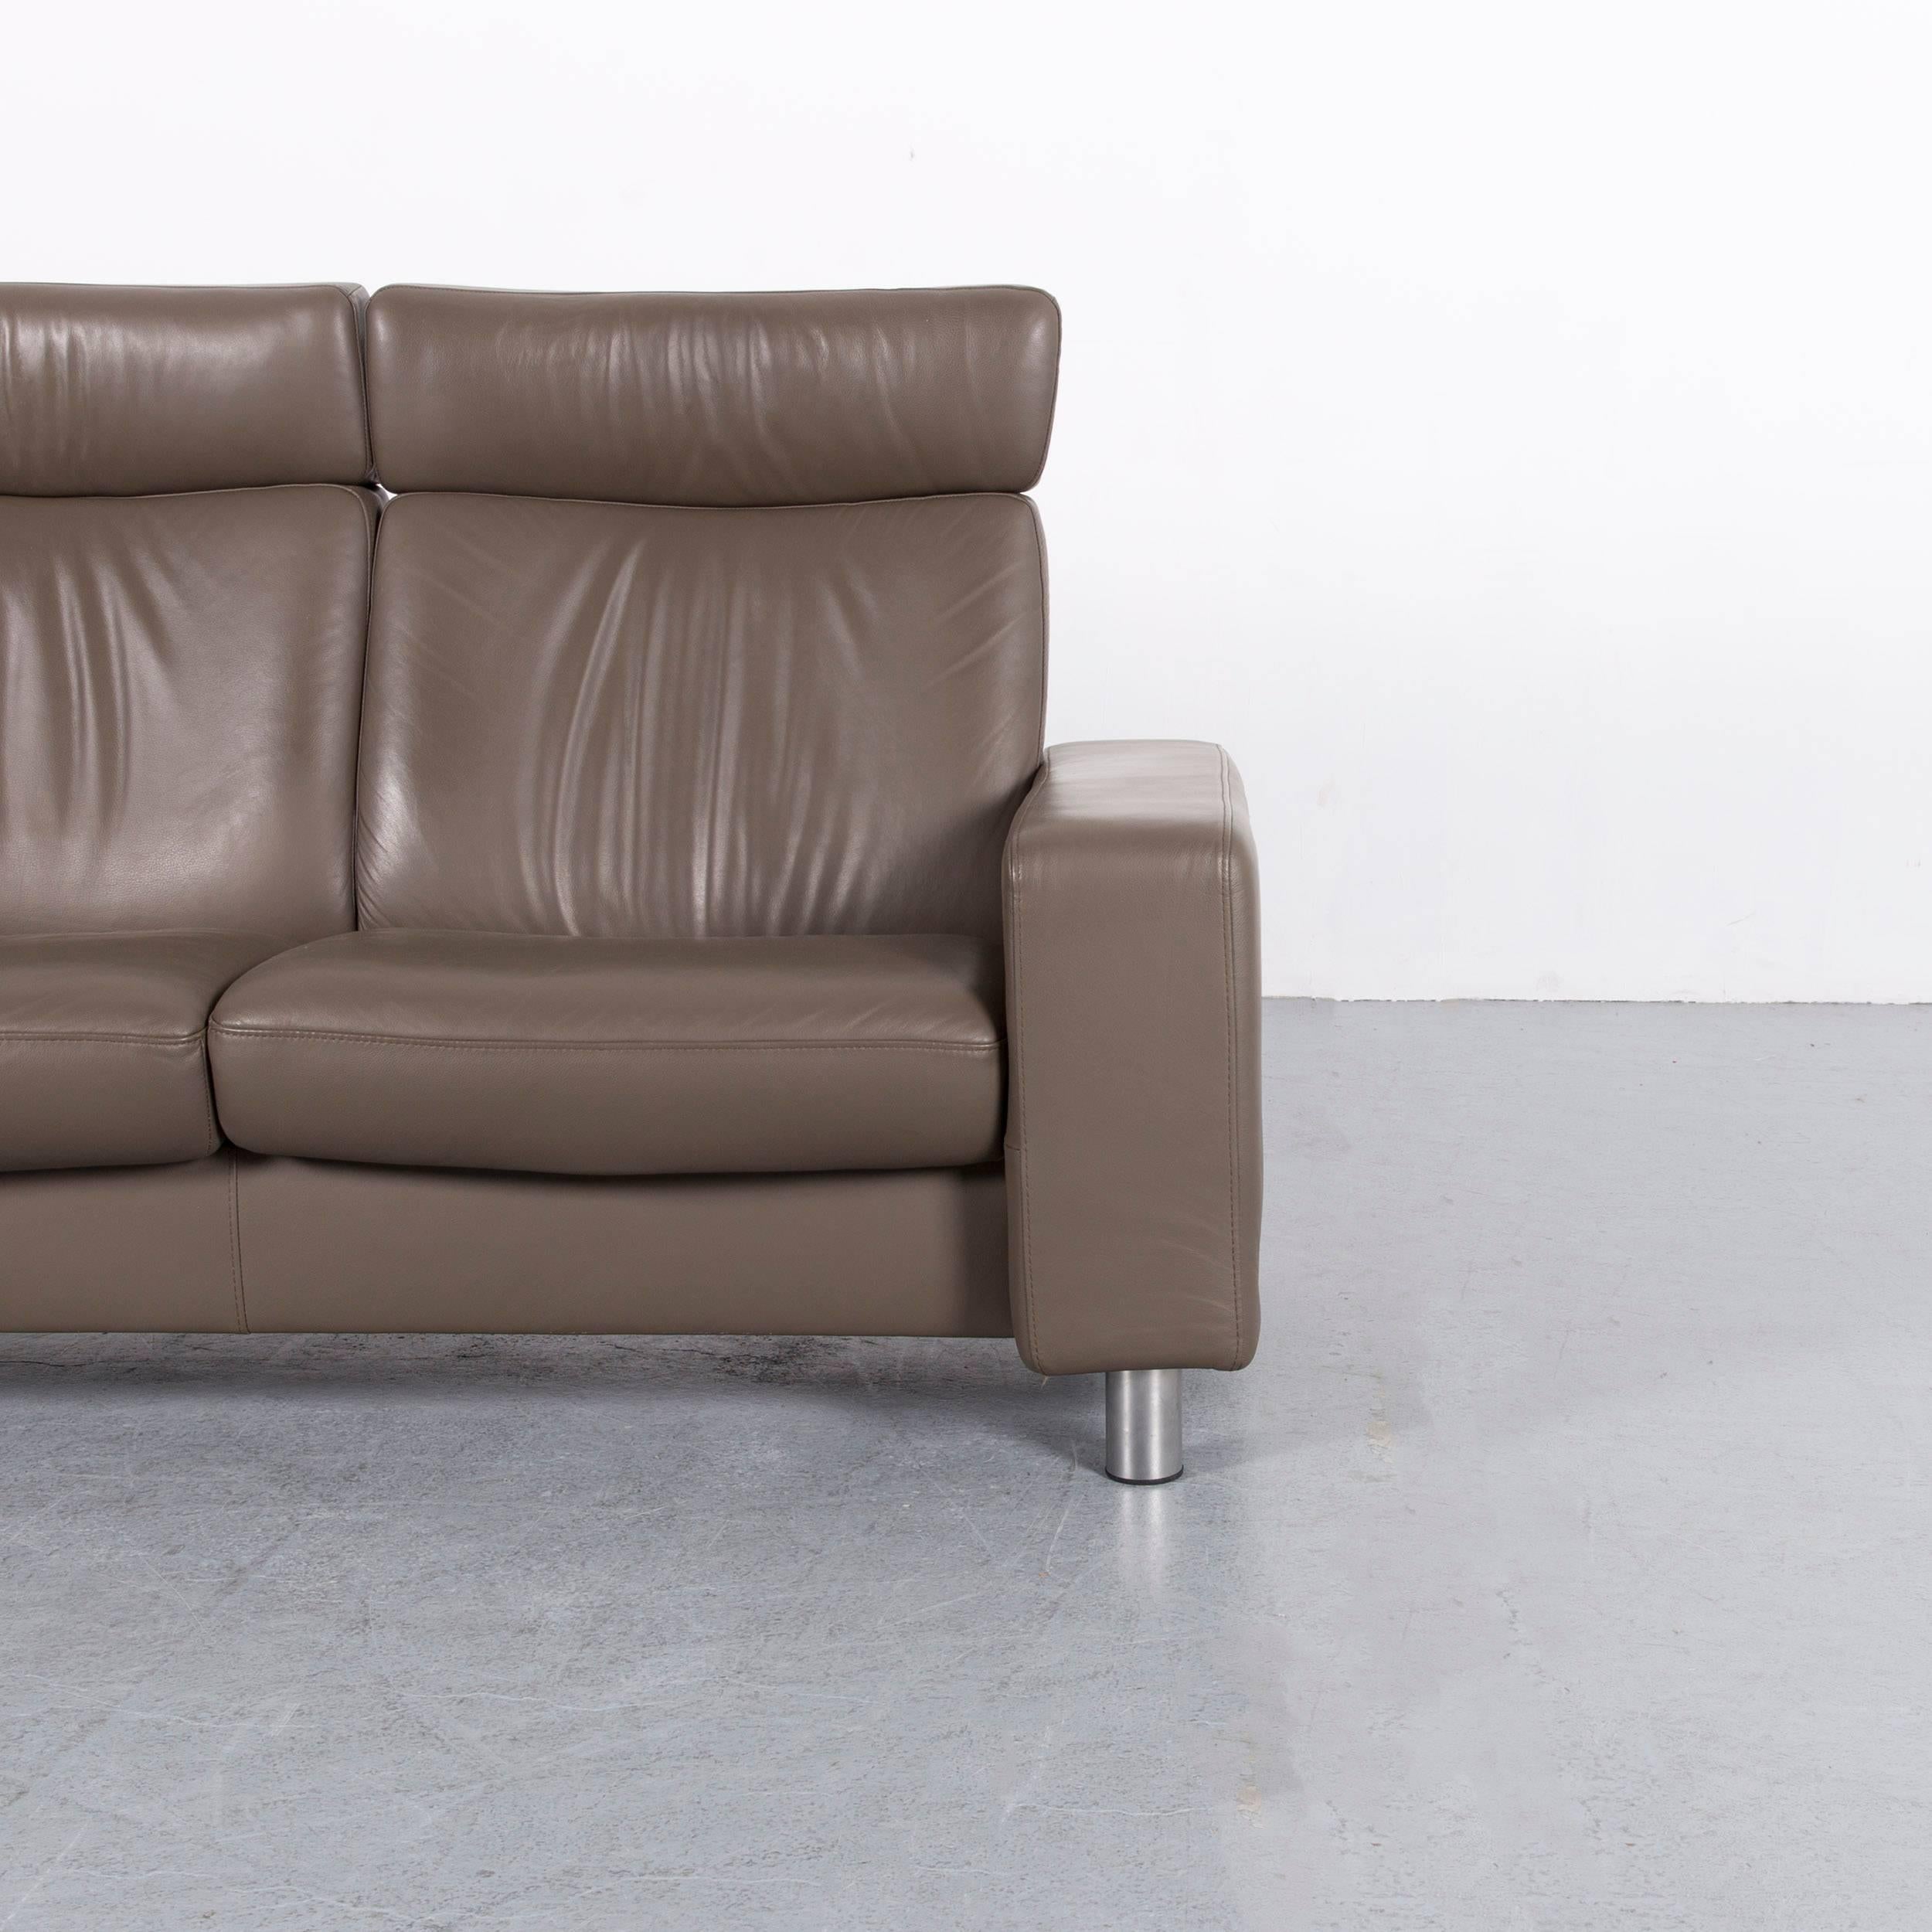 brown leather recliner sofa